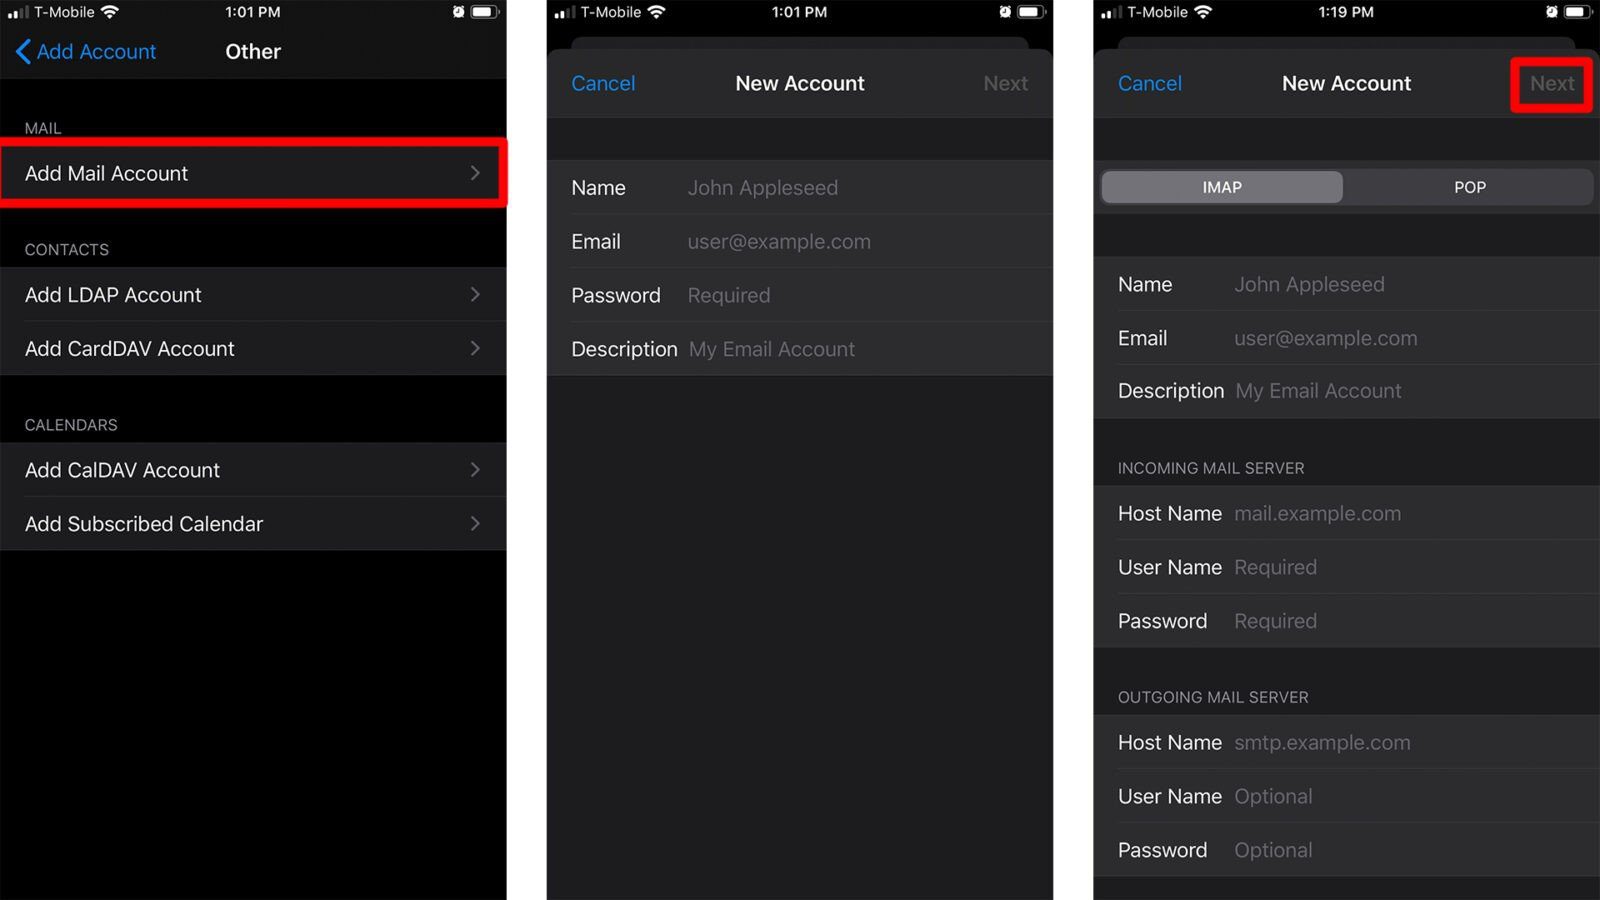 How to Manually Add Other Email Account to iPhone